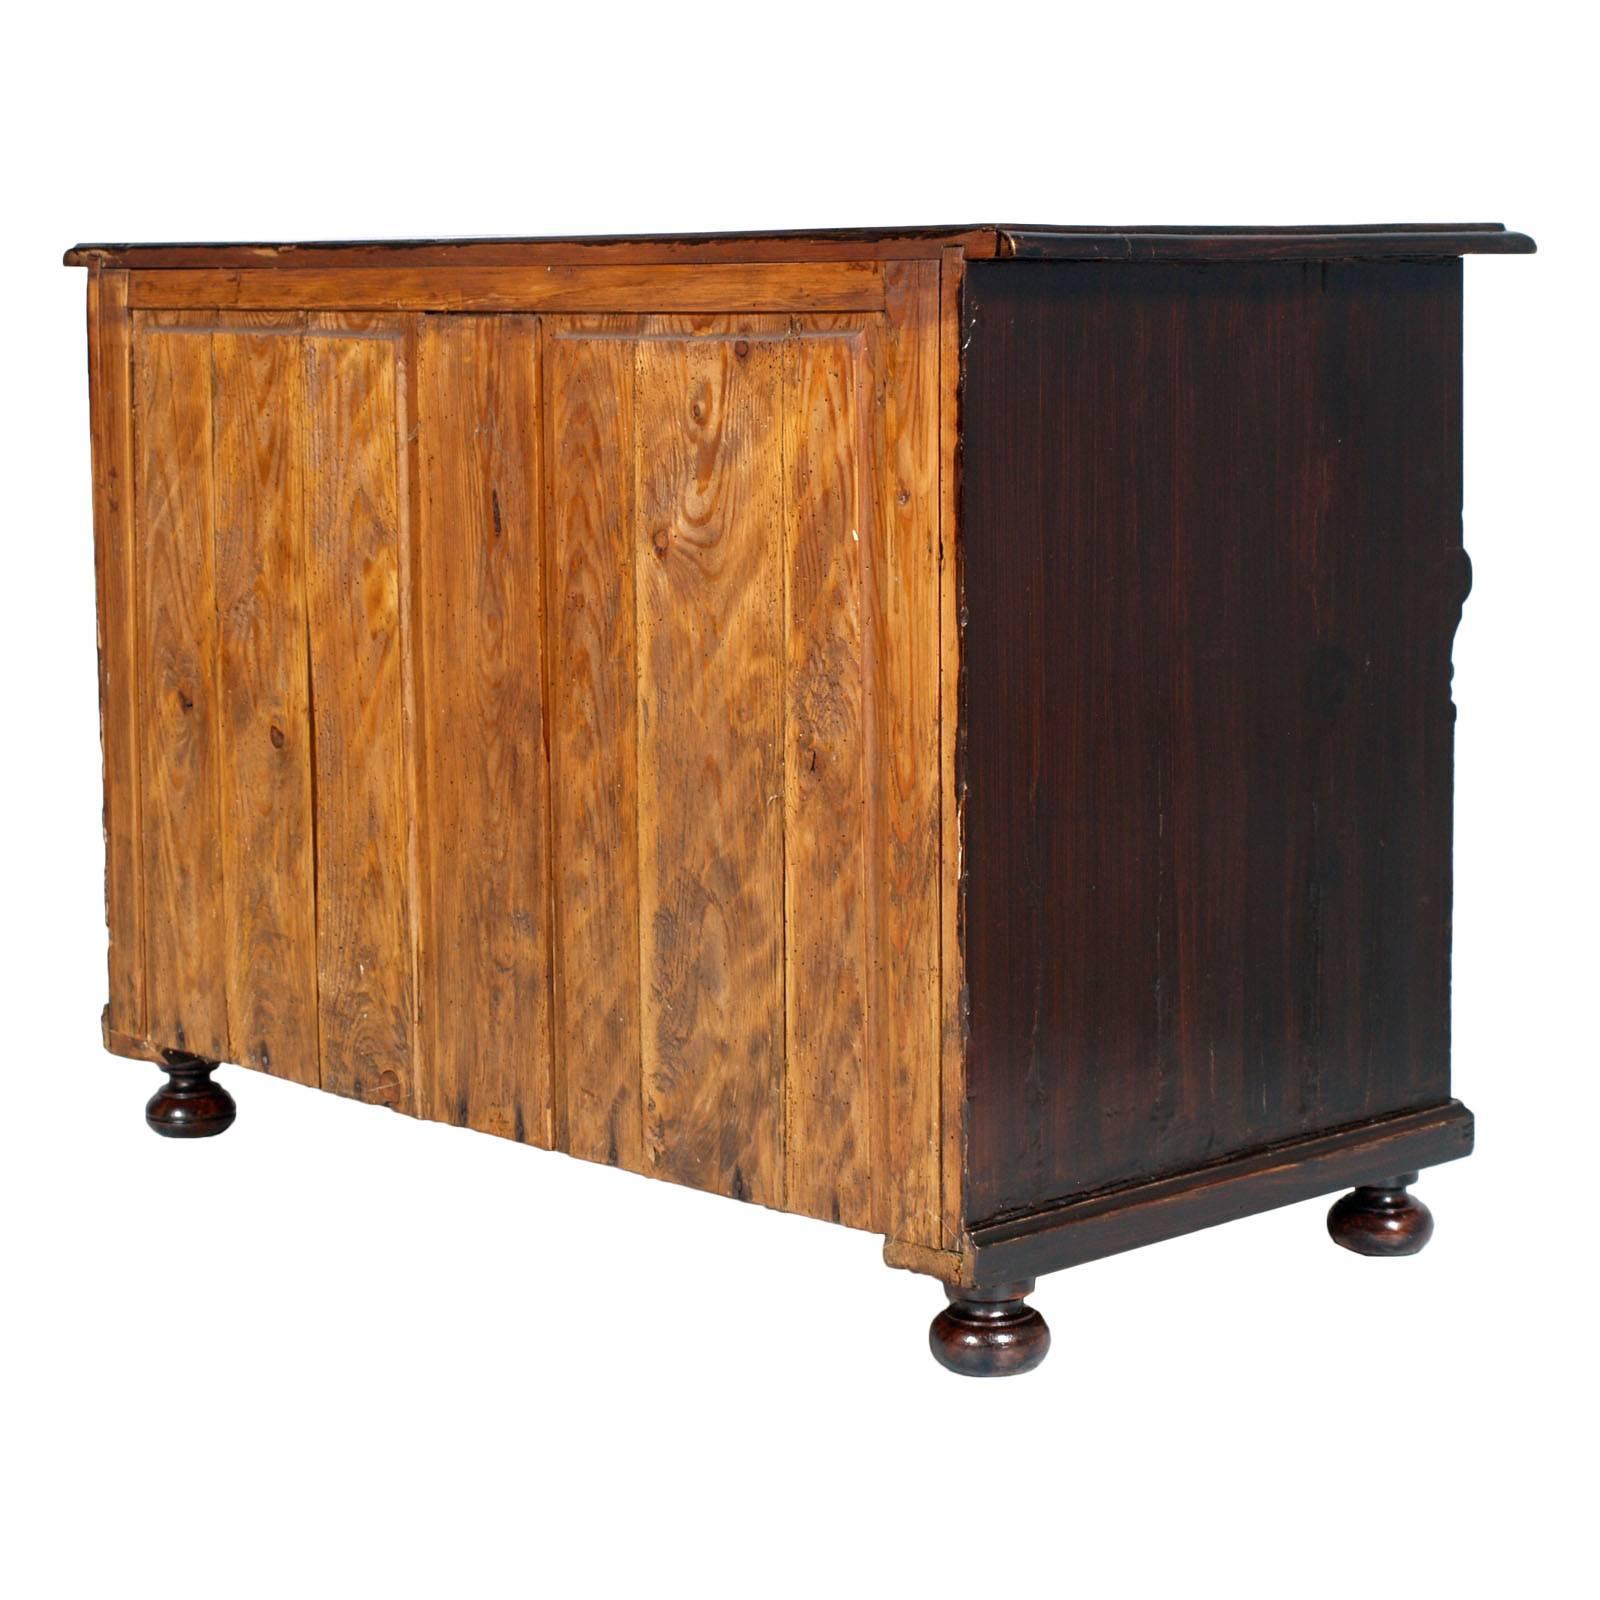 Lacquered 19th Century, Austrian  Biedermeier Chest of Drawers country in solid wood